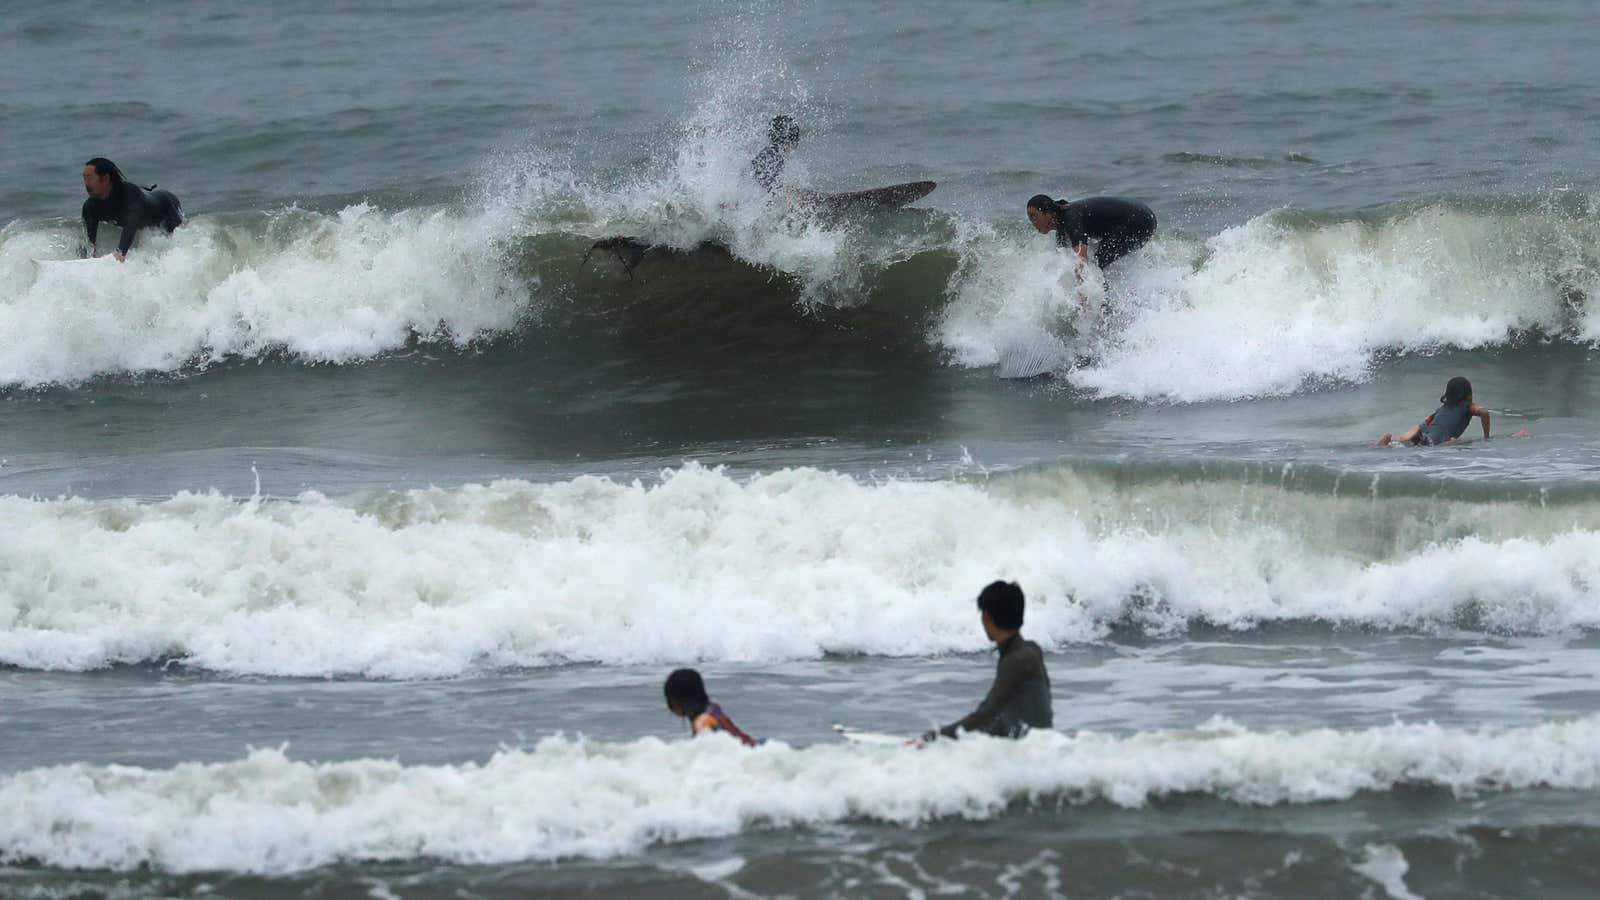 Surfers enjoy the waves near Tsurigasaki Beach, the surfing competition venue for the Tokyo 2020 Olympic Games that have been postponed to 2021 due to the coronavirus disease (COVID-19) pandemic, in Ichinomiya Town, Chiba prefecture, Japan July 1, 2021. REUTERS/Issei Kato